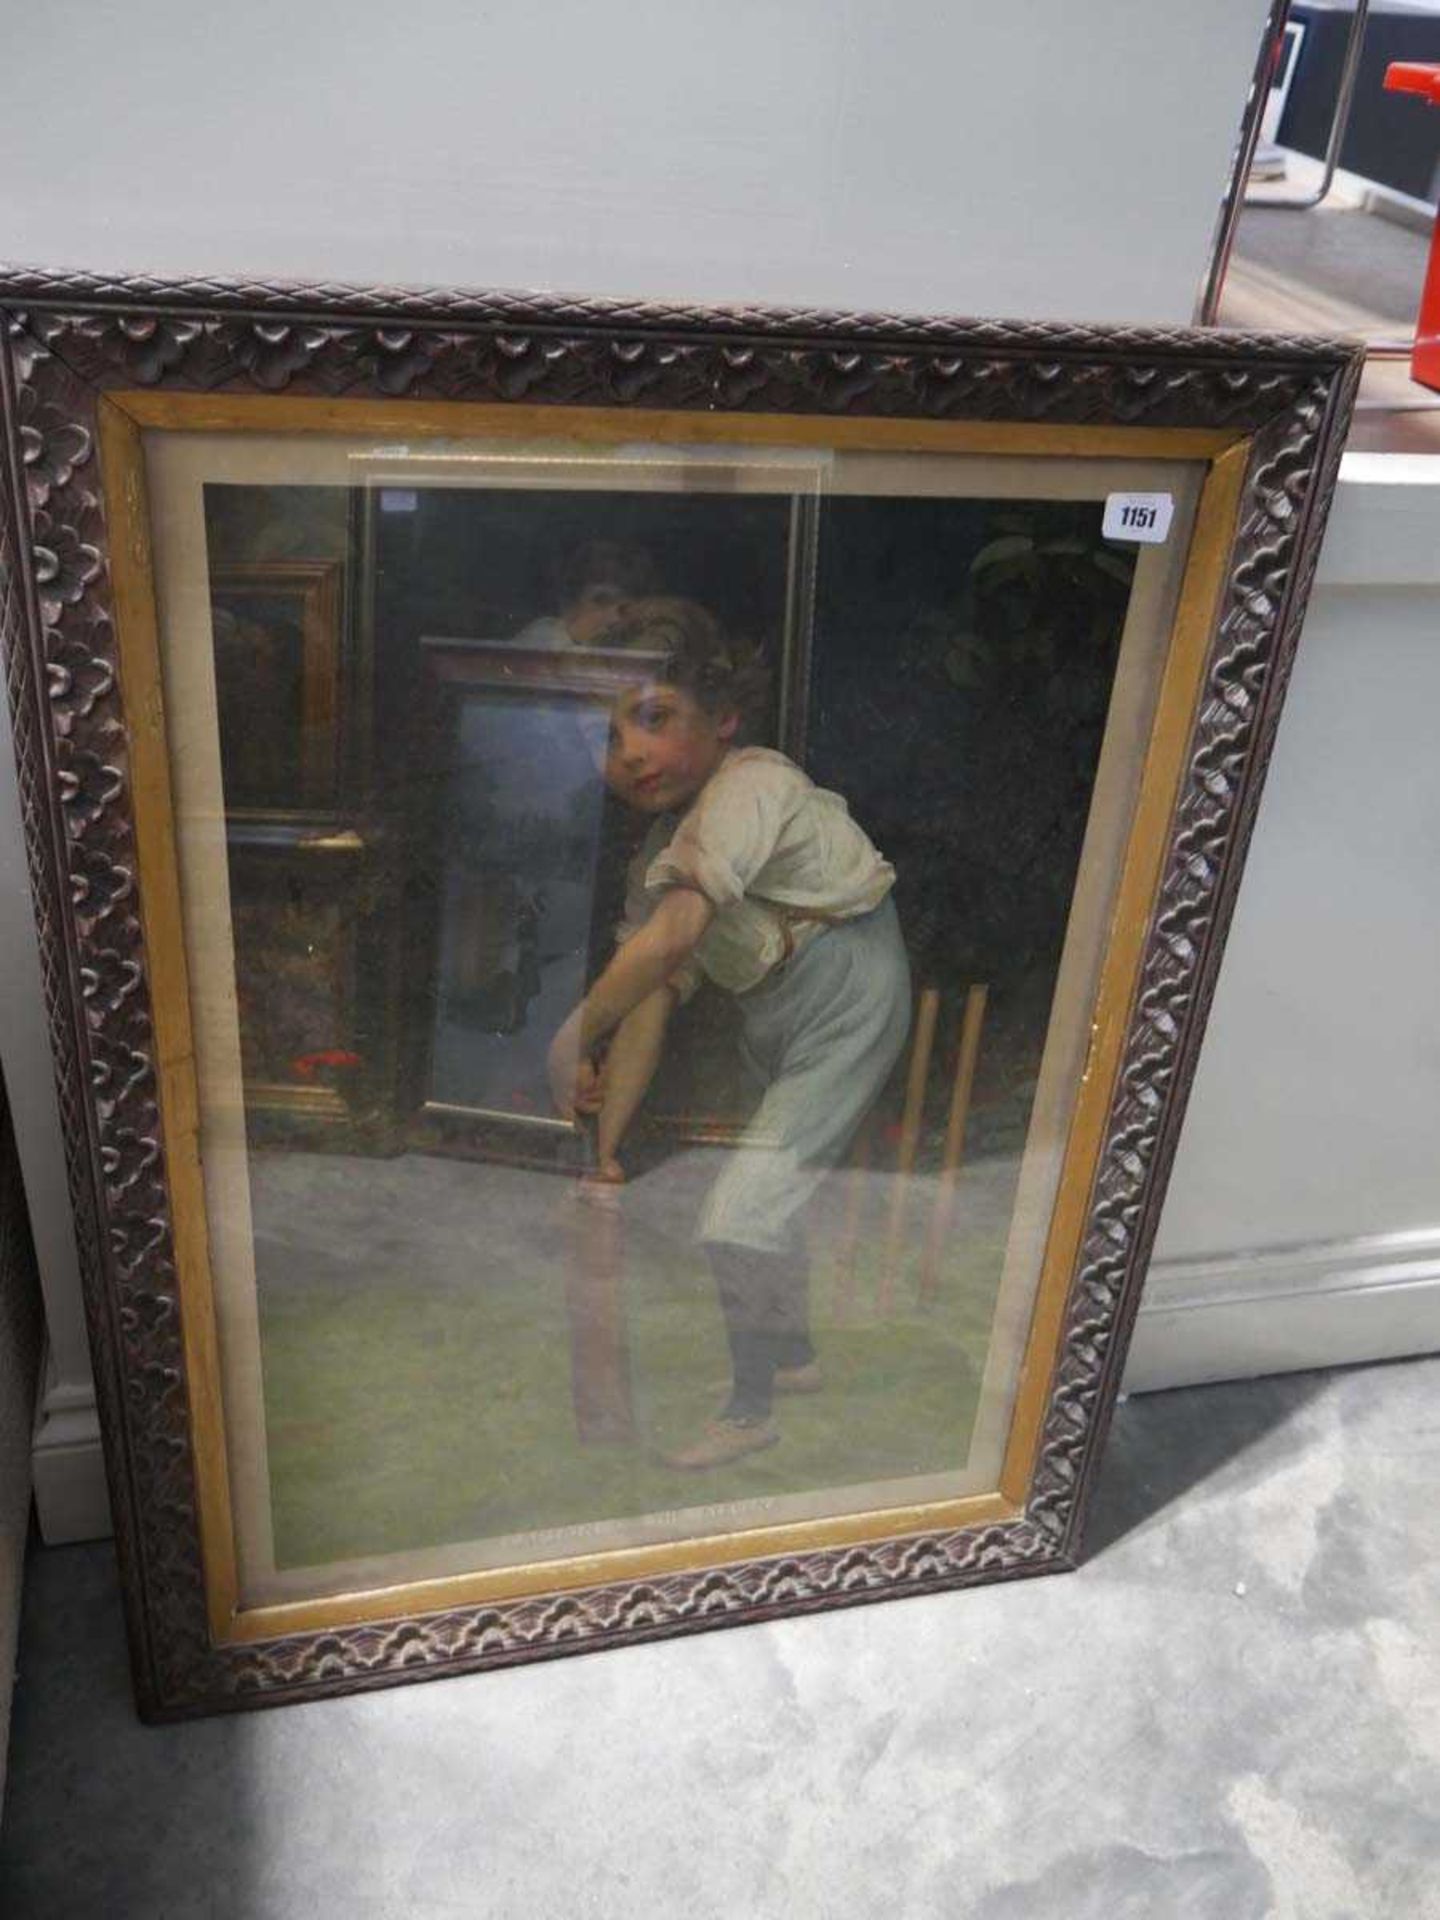 Ornately framed and glazed Pears Soap advertisement depicting young boy playing cricket